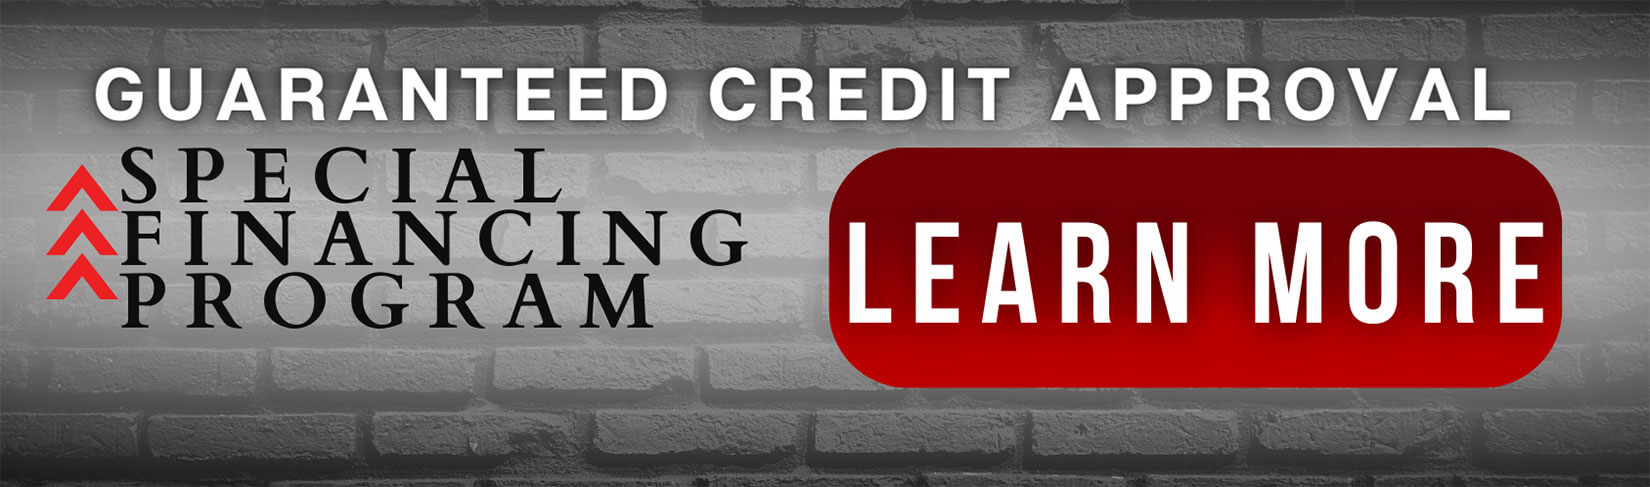 Guaranteed credit approval, special financing program, click here to learn more.